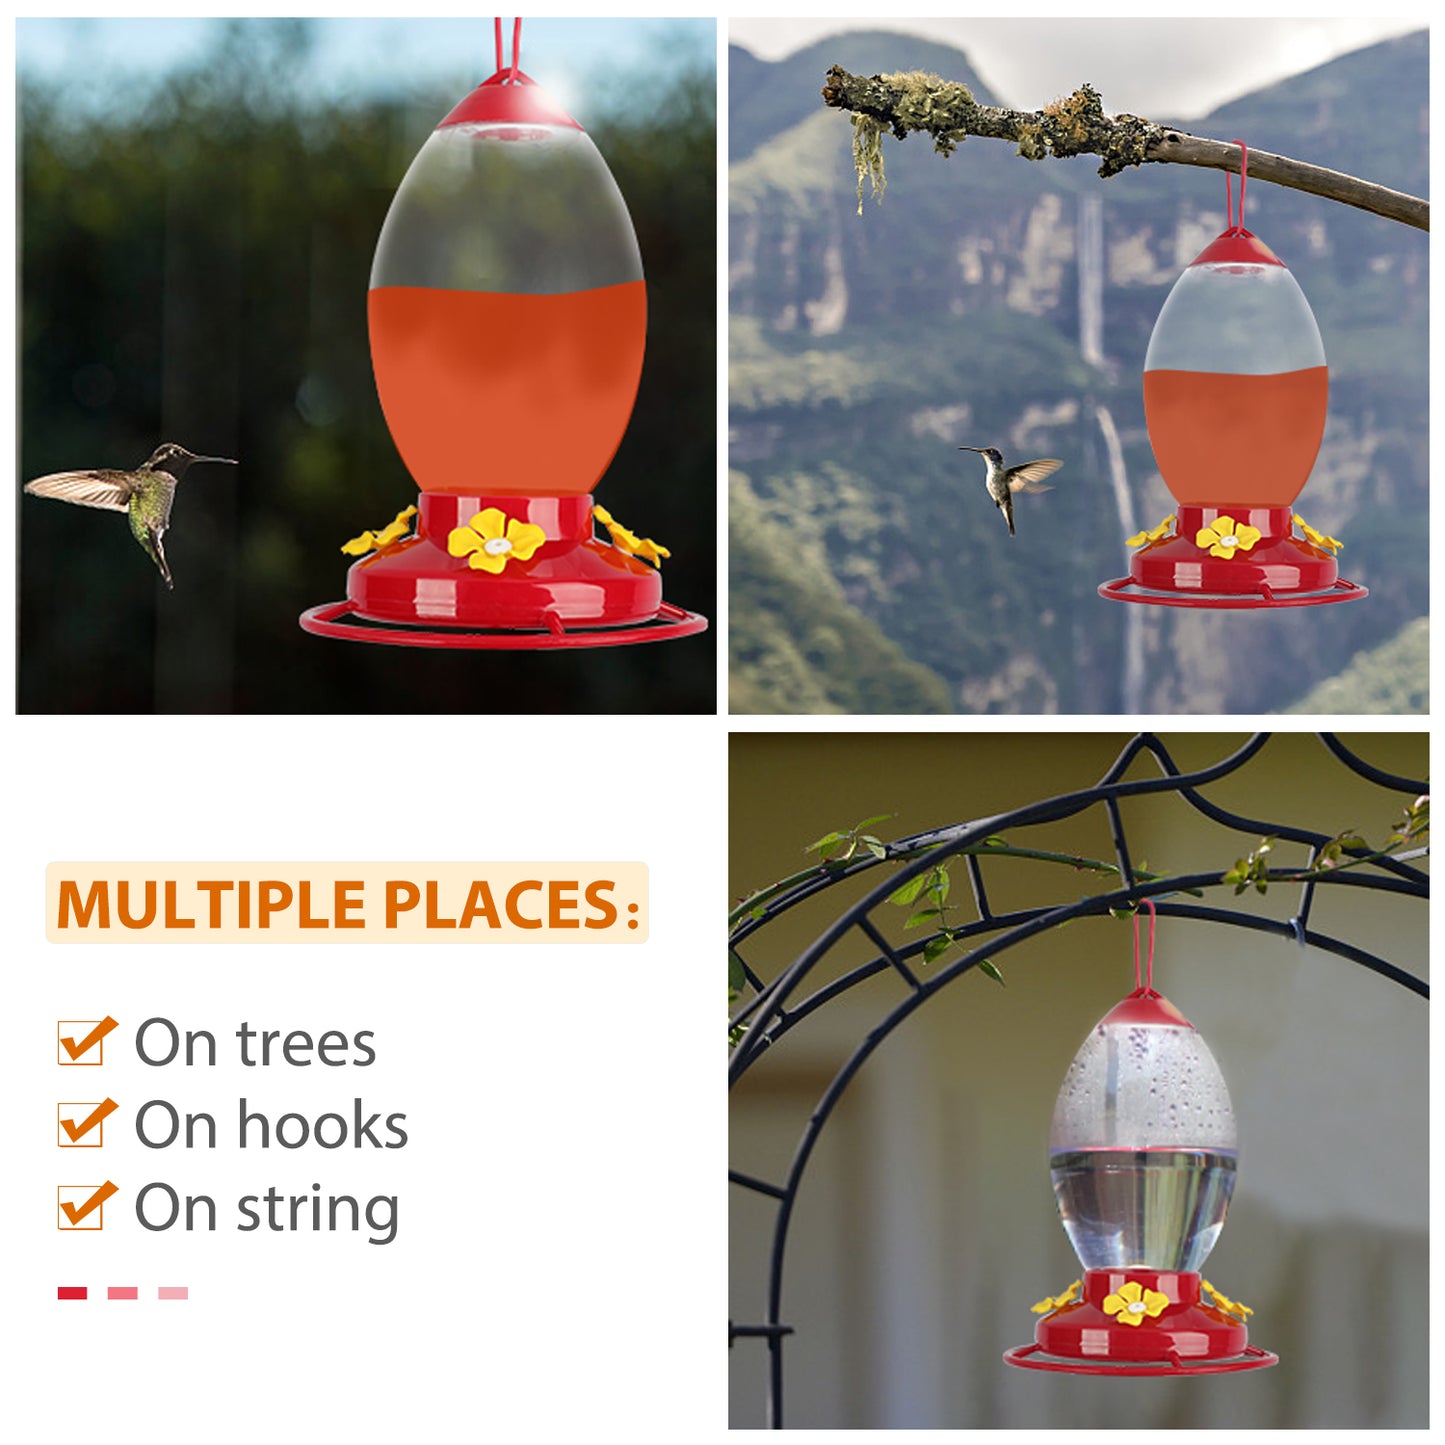 Hummingbirds Feeders for Outdoors with 4 Feeding Stations